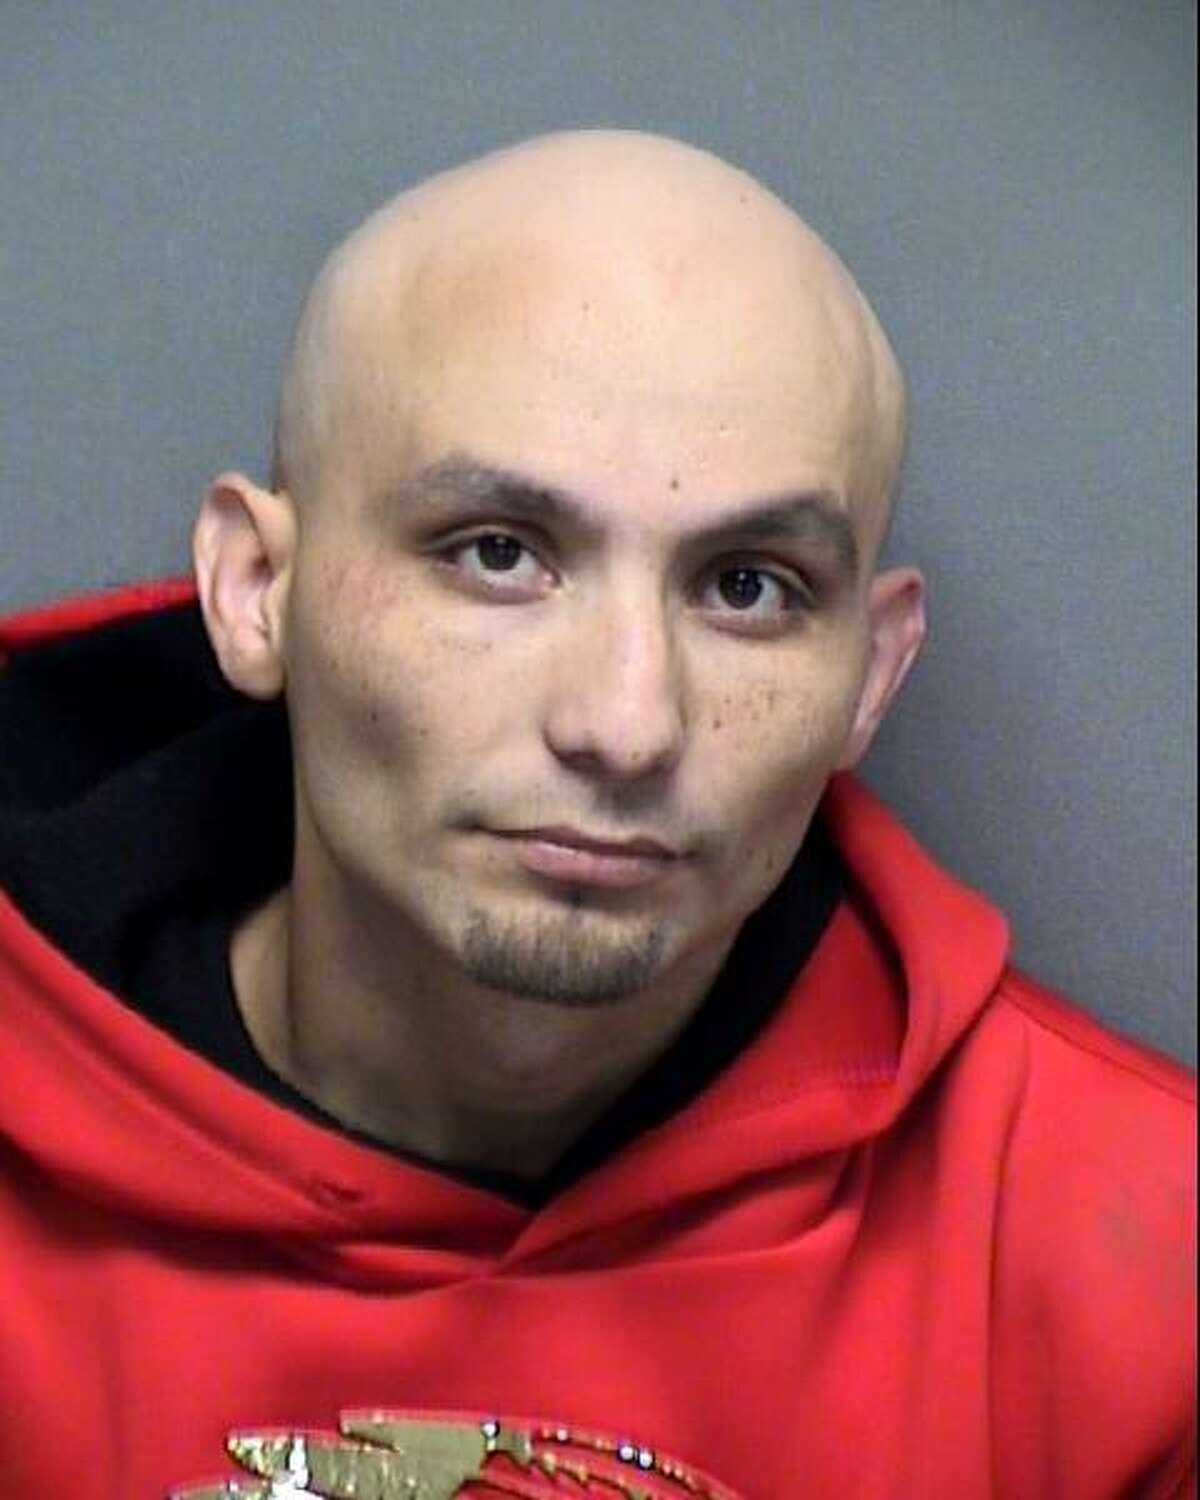 Patrick Ryan Ingle, 32, is charged with aggravated robbery and evading arrest with a vehicle. He was arrested arrested early Wednesday after a 38 minute police chase in a stolen pickup that began Tuesday night on the Northeast Side and continued through two other counties, according to San Antonio Police.